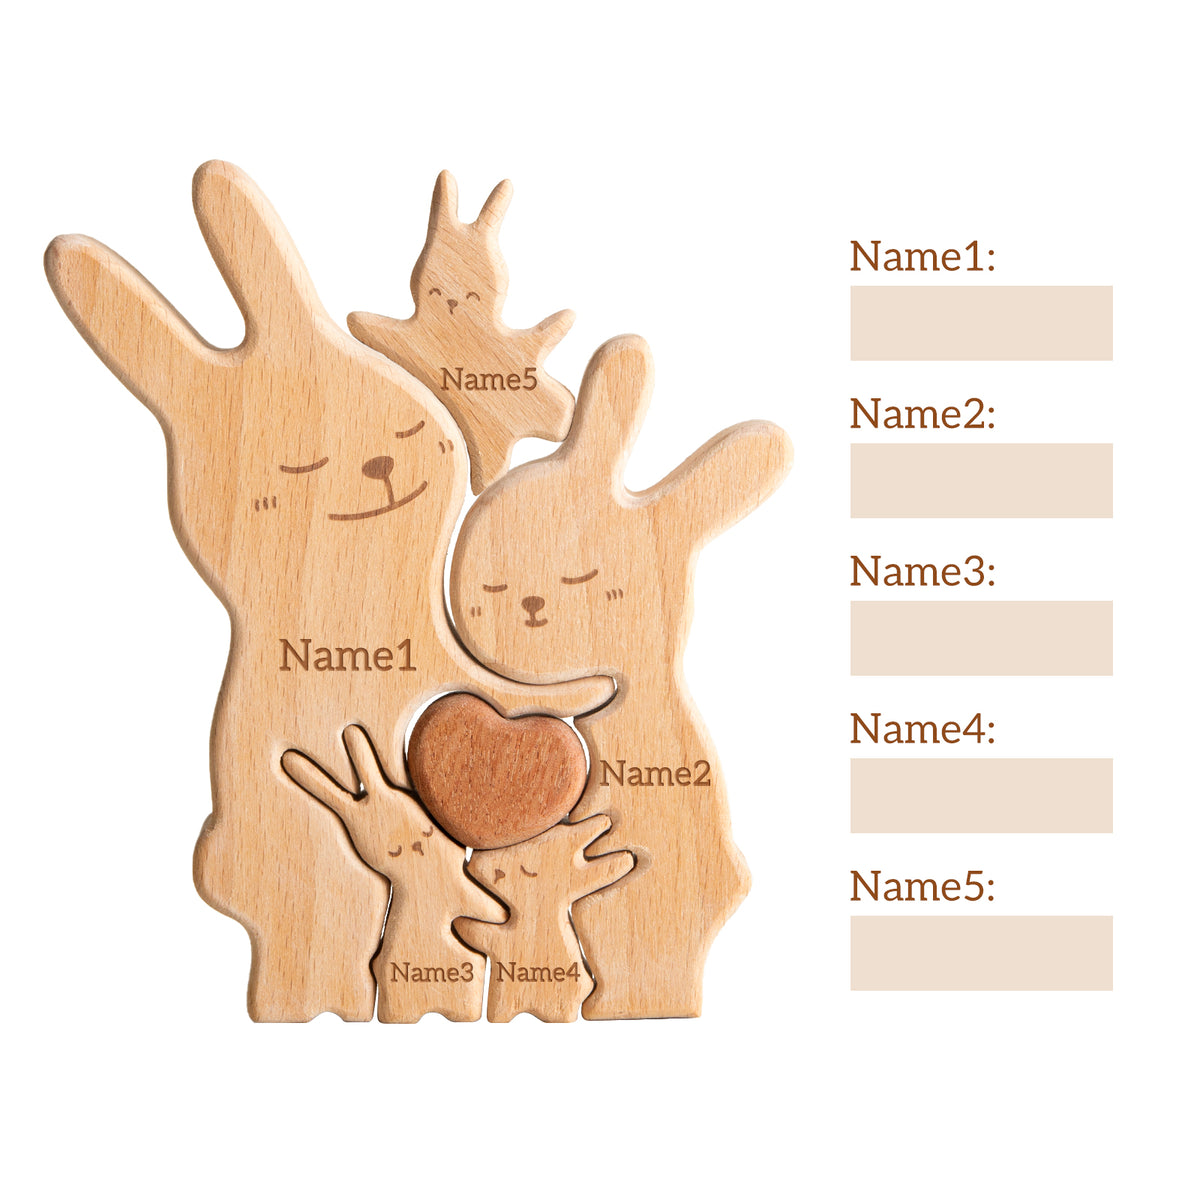 Bunny Family Puzzle, Personalized Wooden Puzzle for Adults and Kids with 2-5 Names